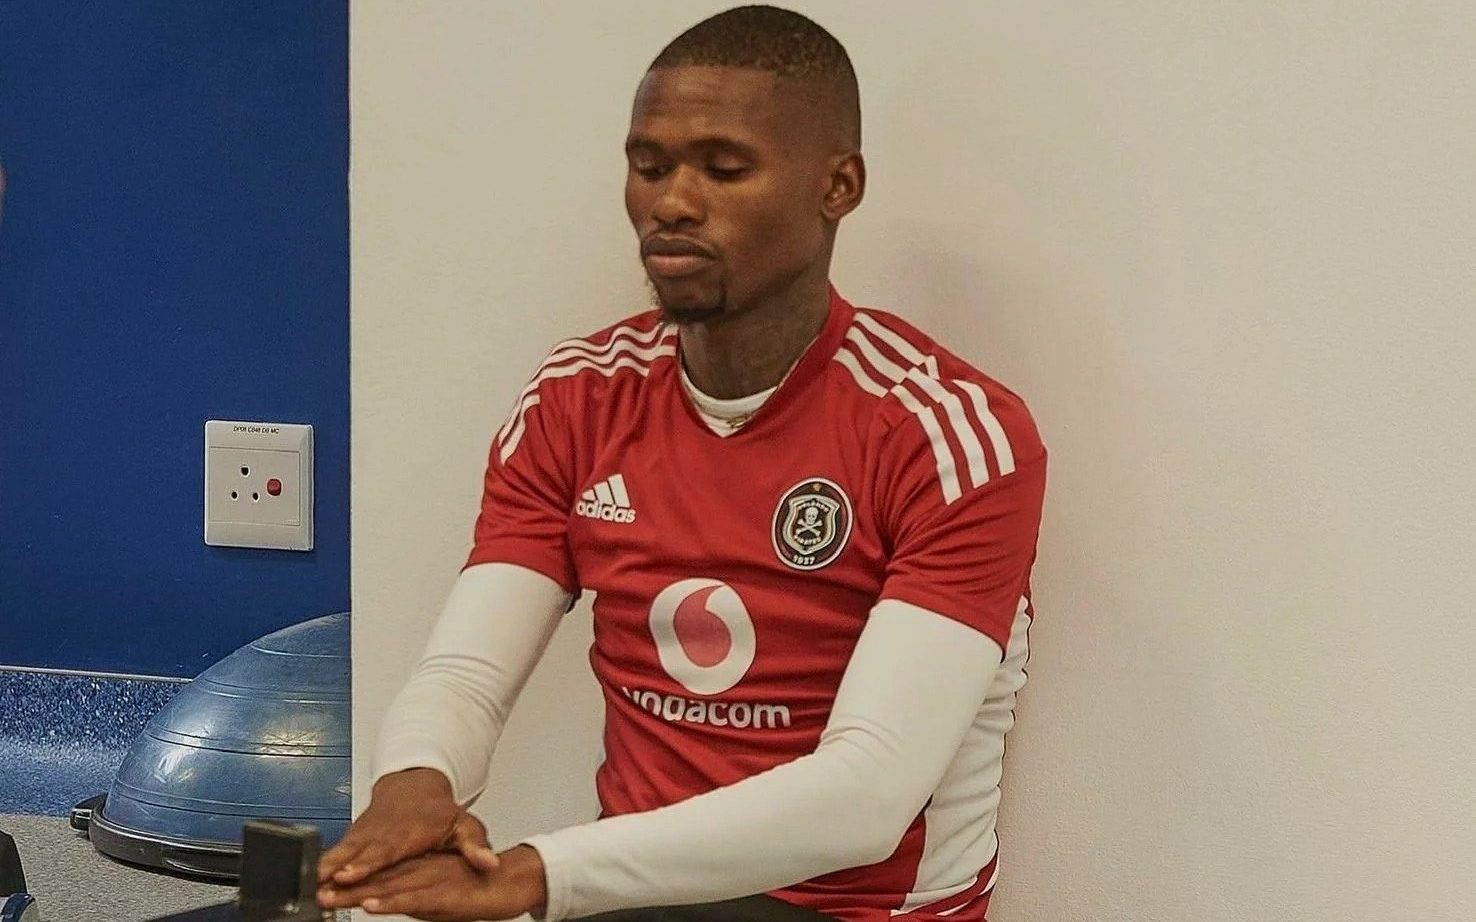 What sets Orlando Pirates' Baloni apart from the rest